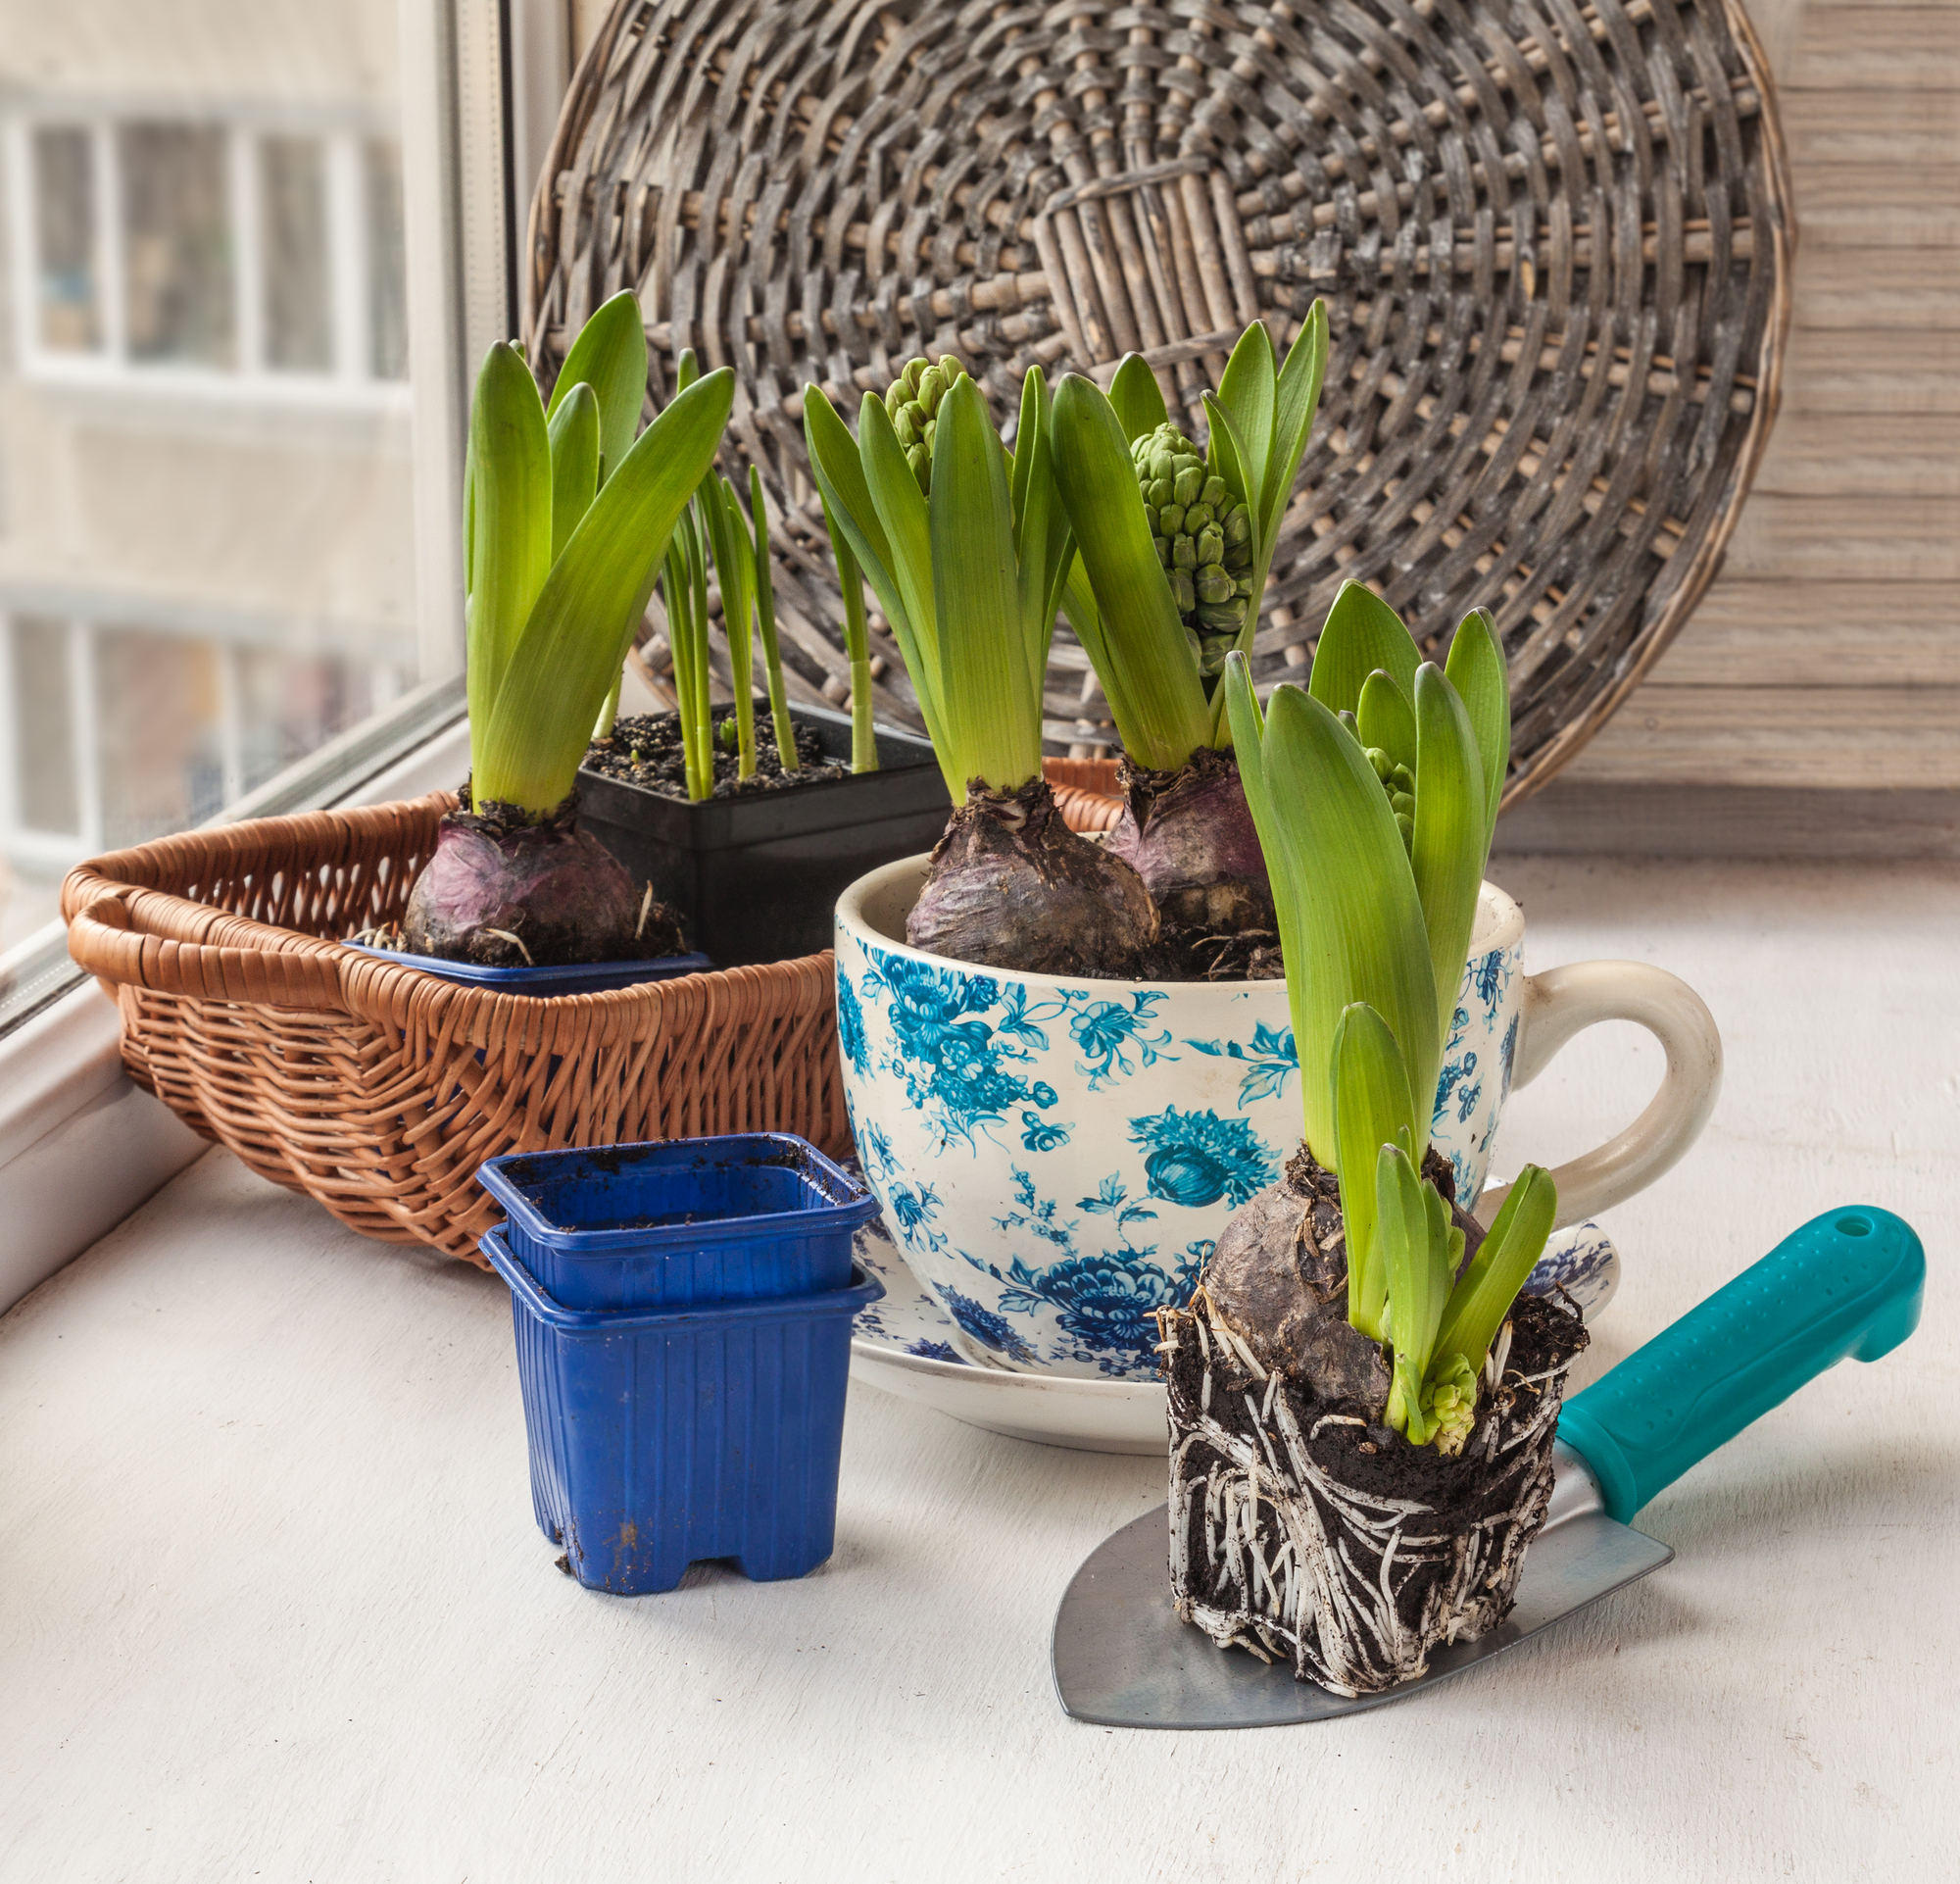 forced bulbs with green shoots